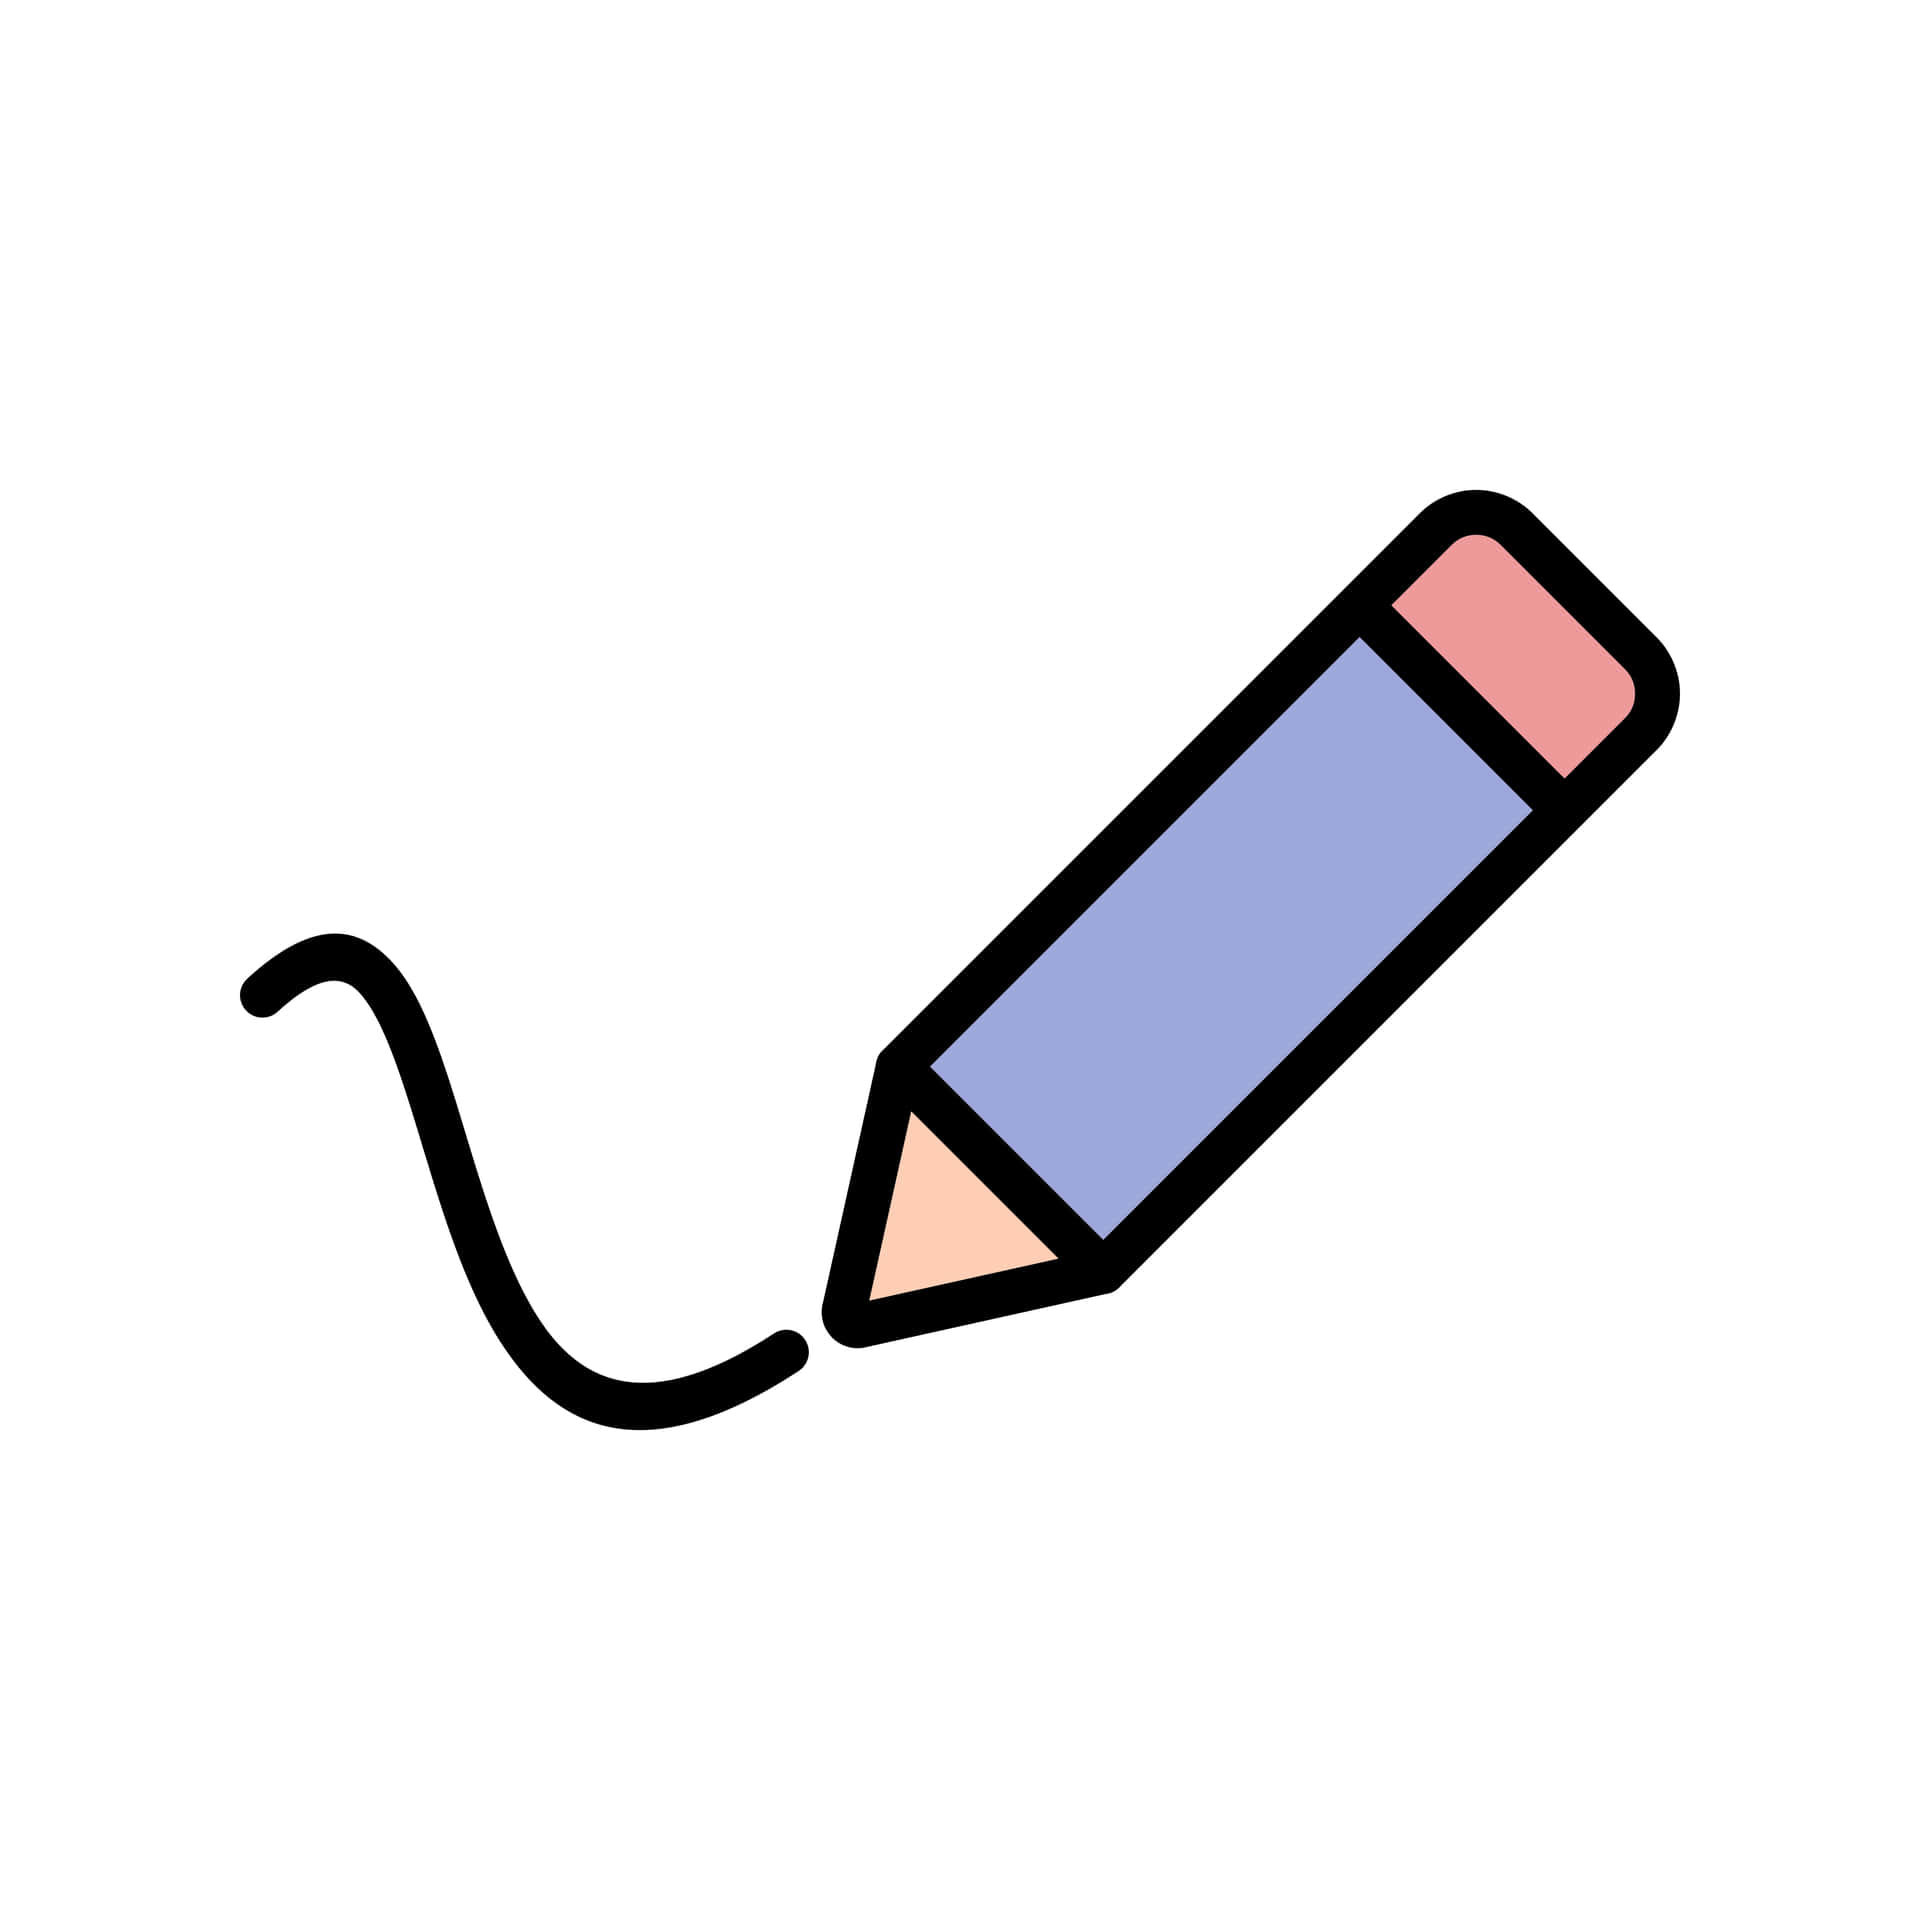 A Pencil Icon With A Blue And Purple Line